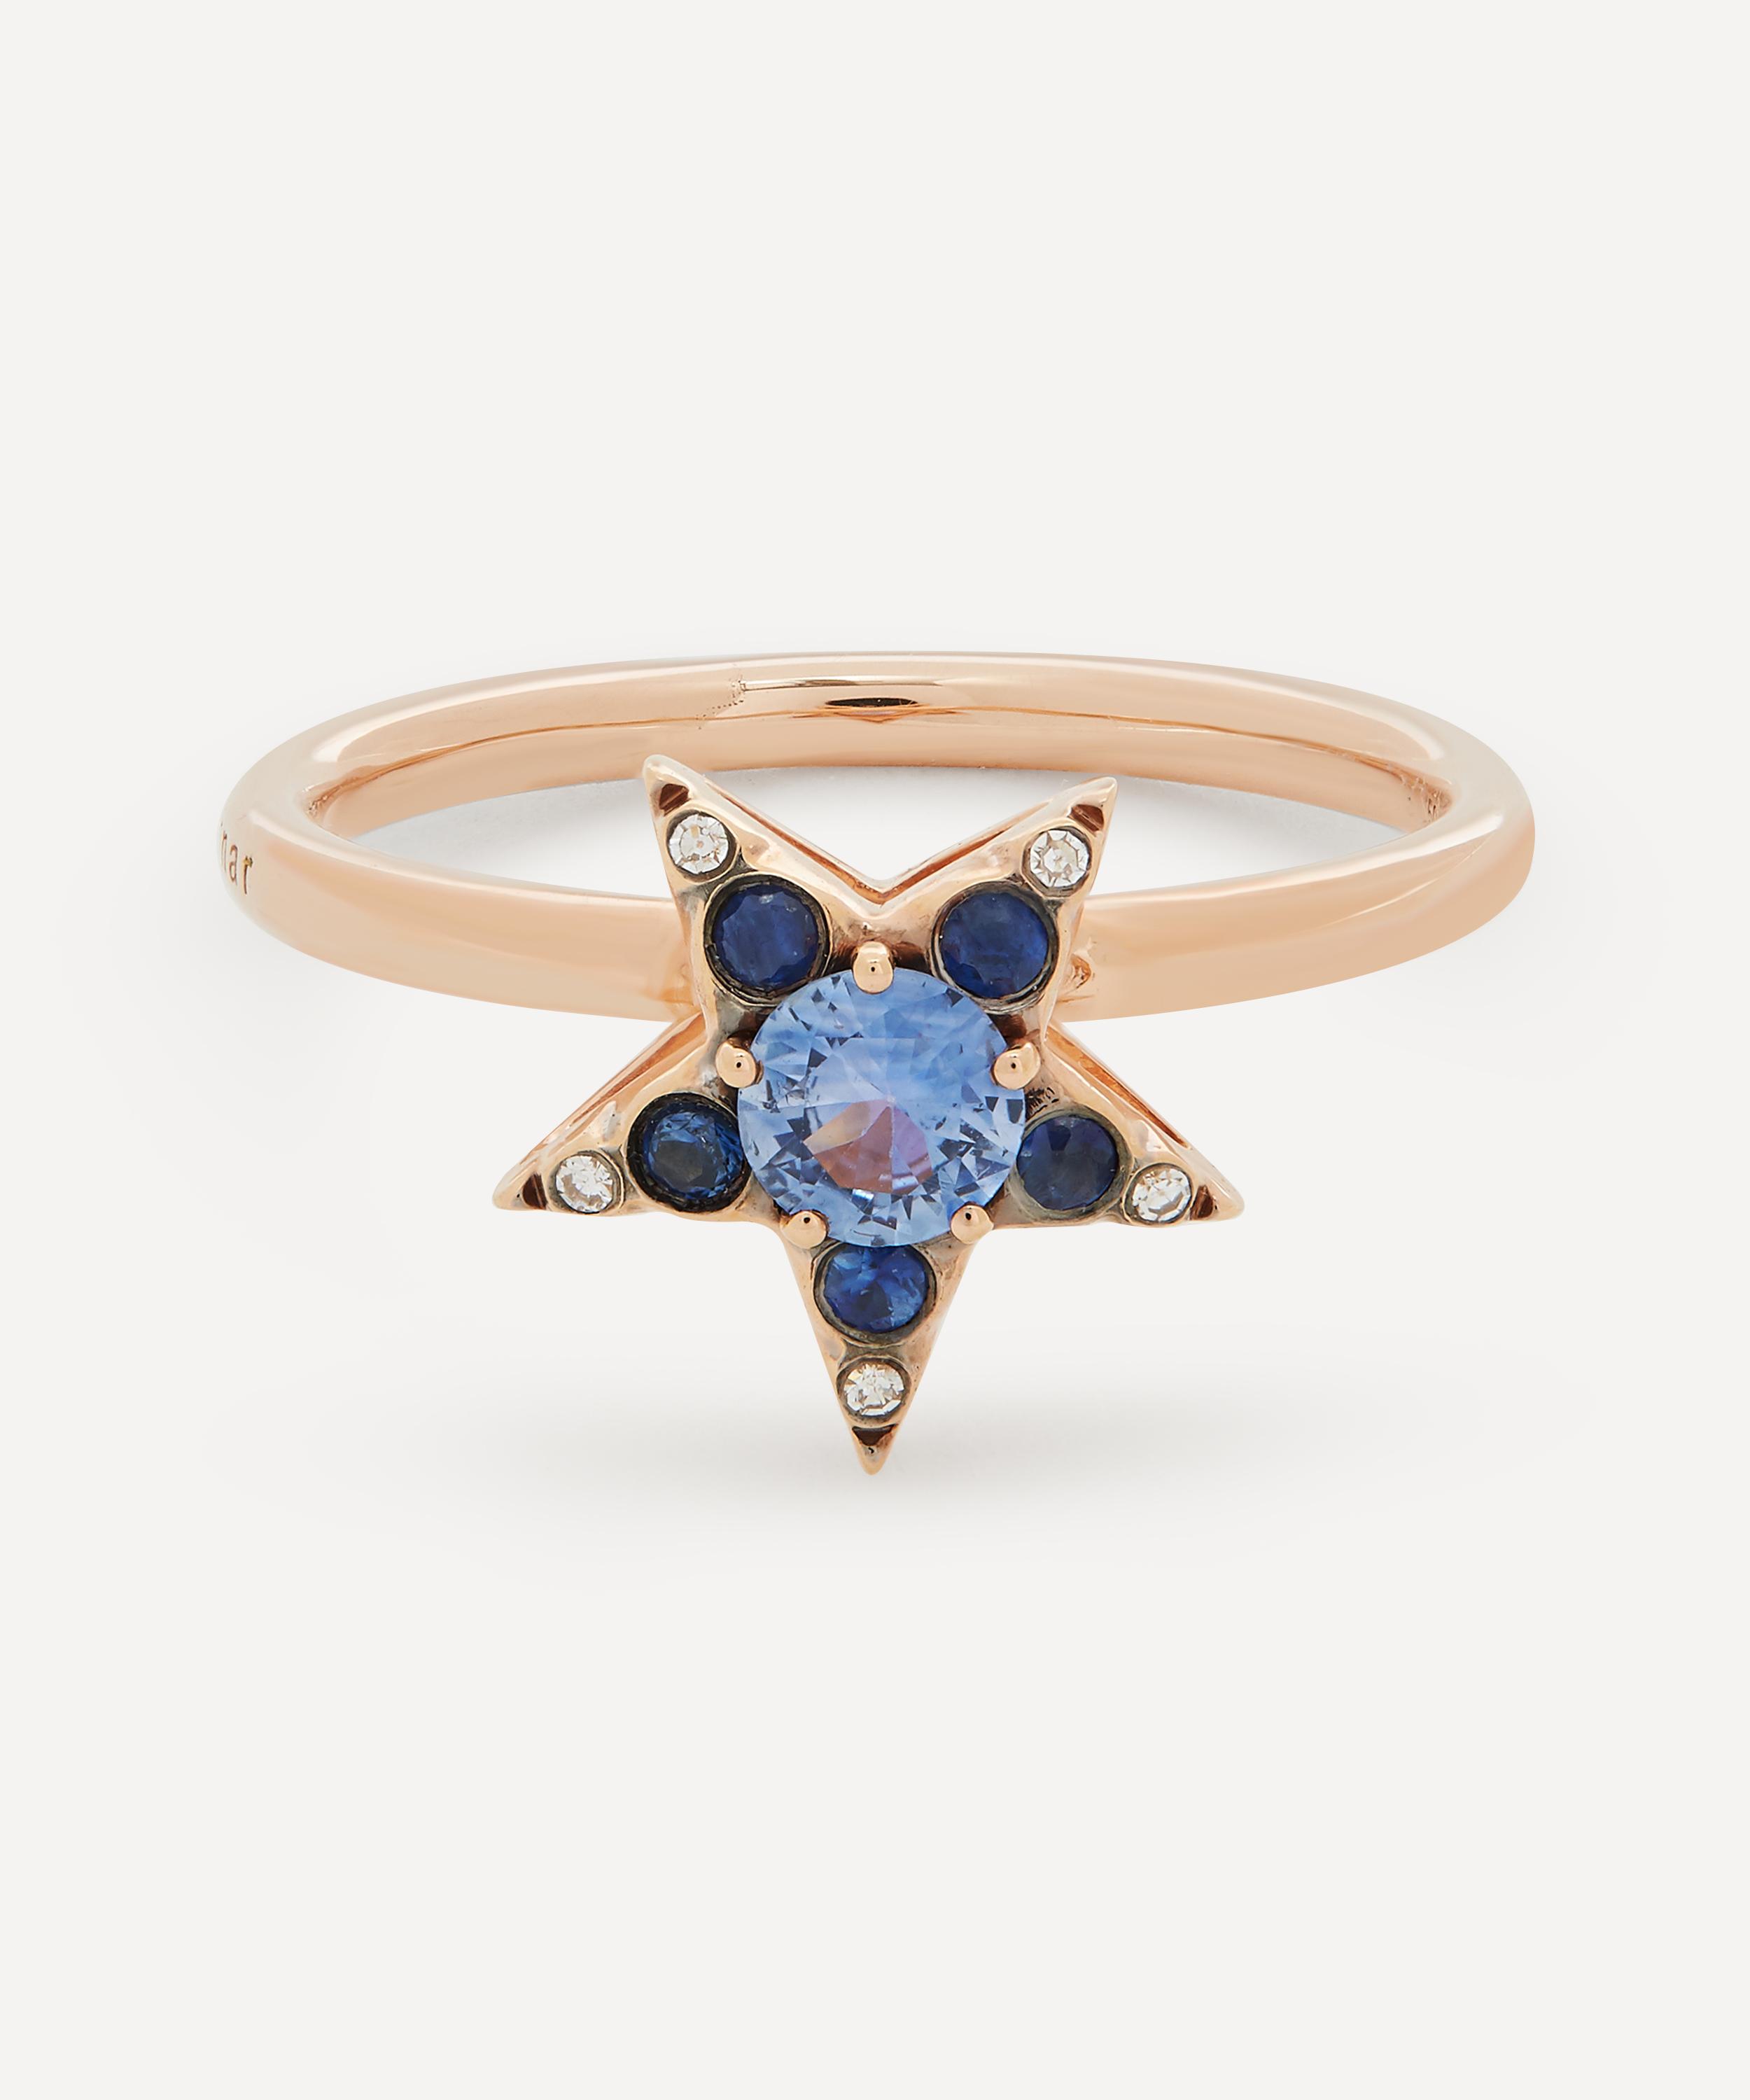 SELIM MOUZANNAR ROSE GOLD ISTANBUL BLUE SAPPHIRE AND DIAMOND STAR RING,000721021